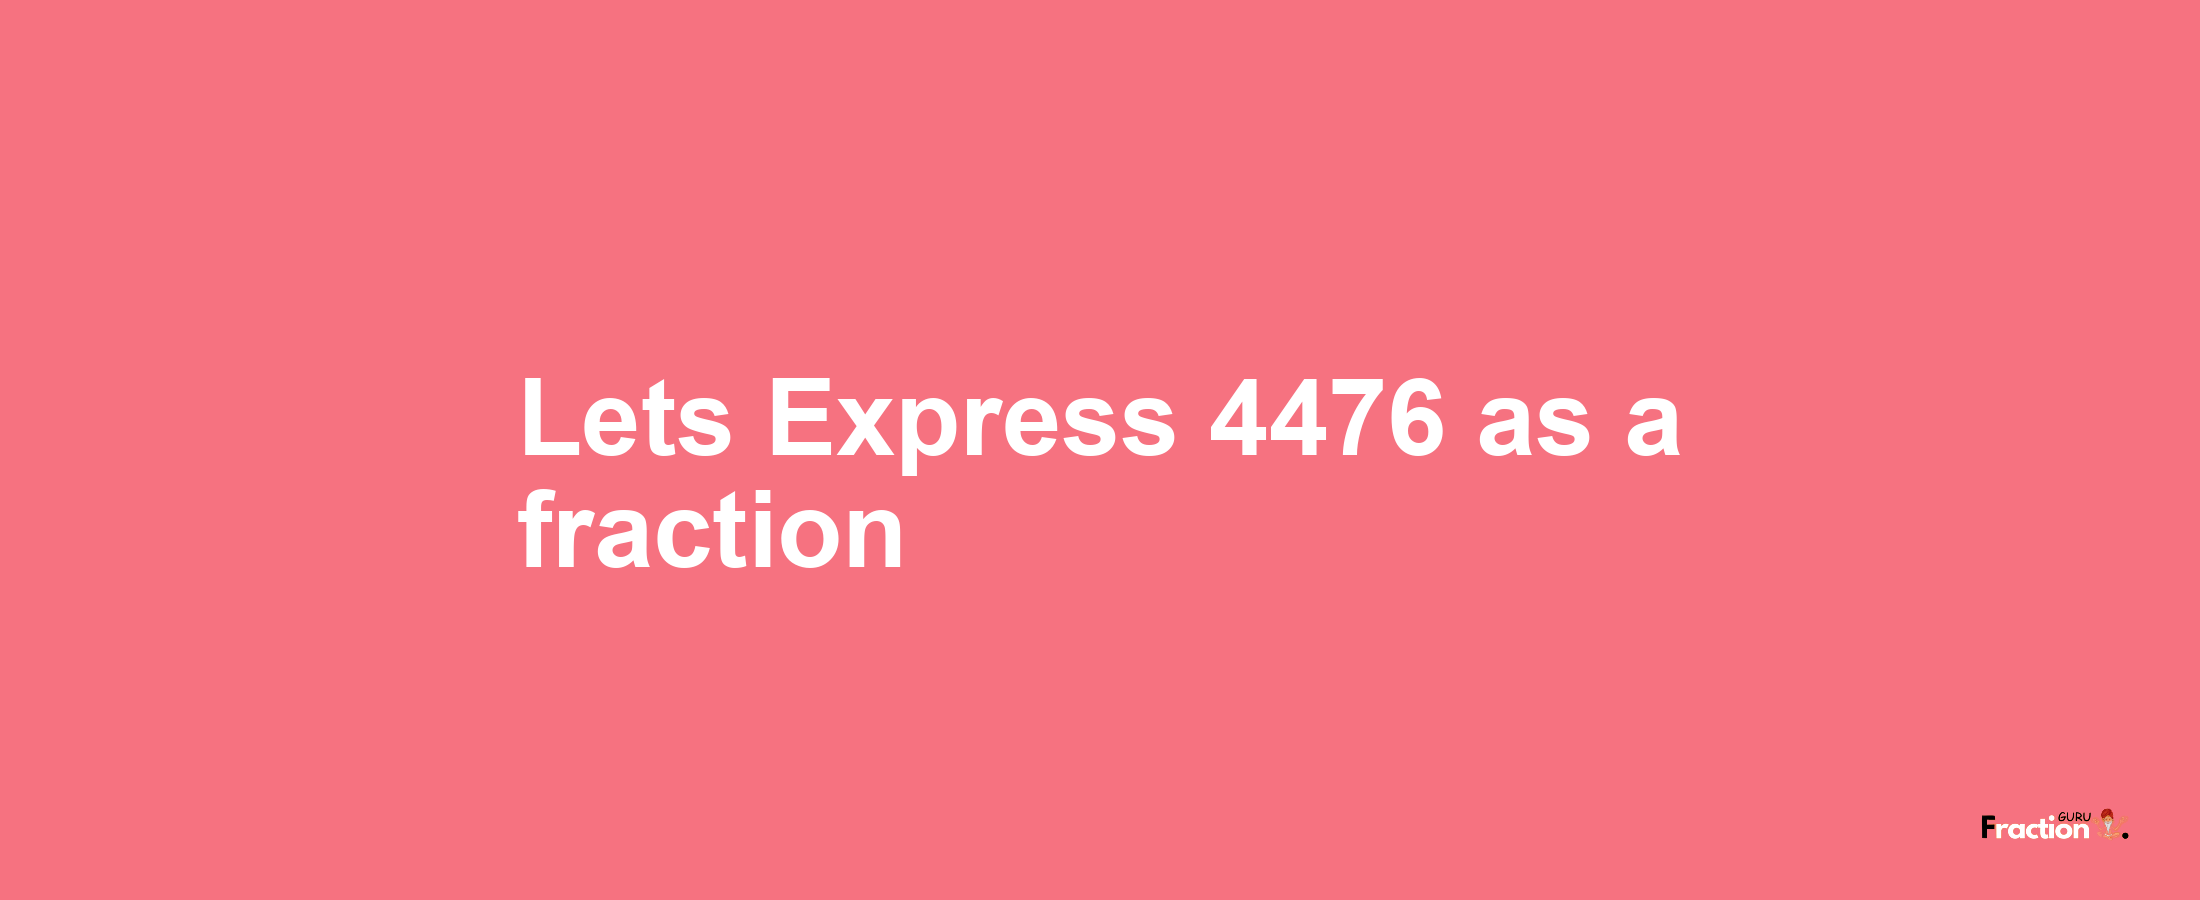 Lets Express 4476 as afraction